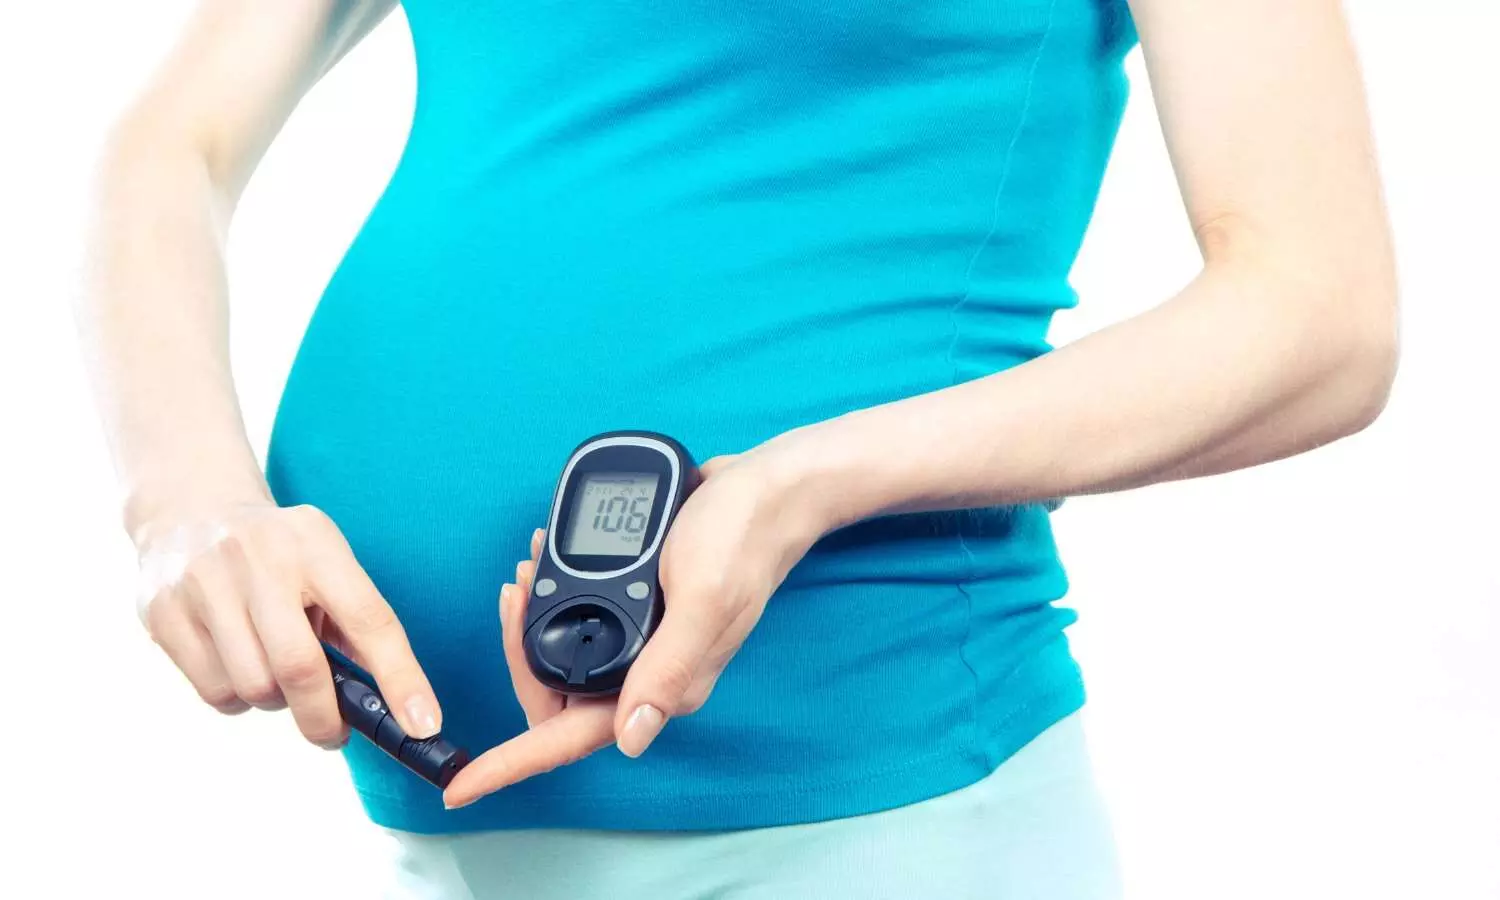 Regular coffee consumption lowers diabetes risk in women who had diabetes during pregnancy